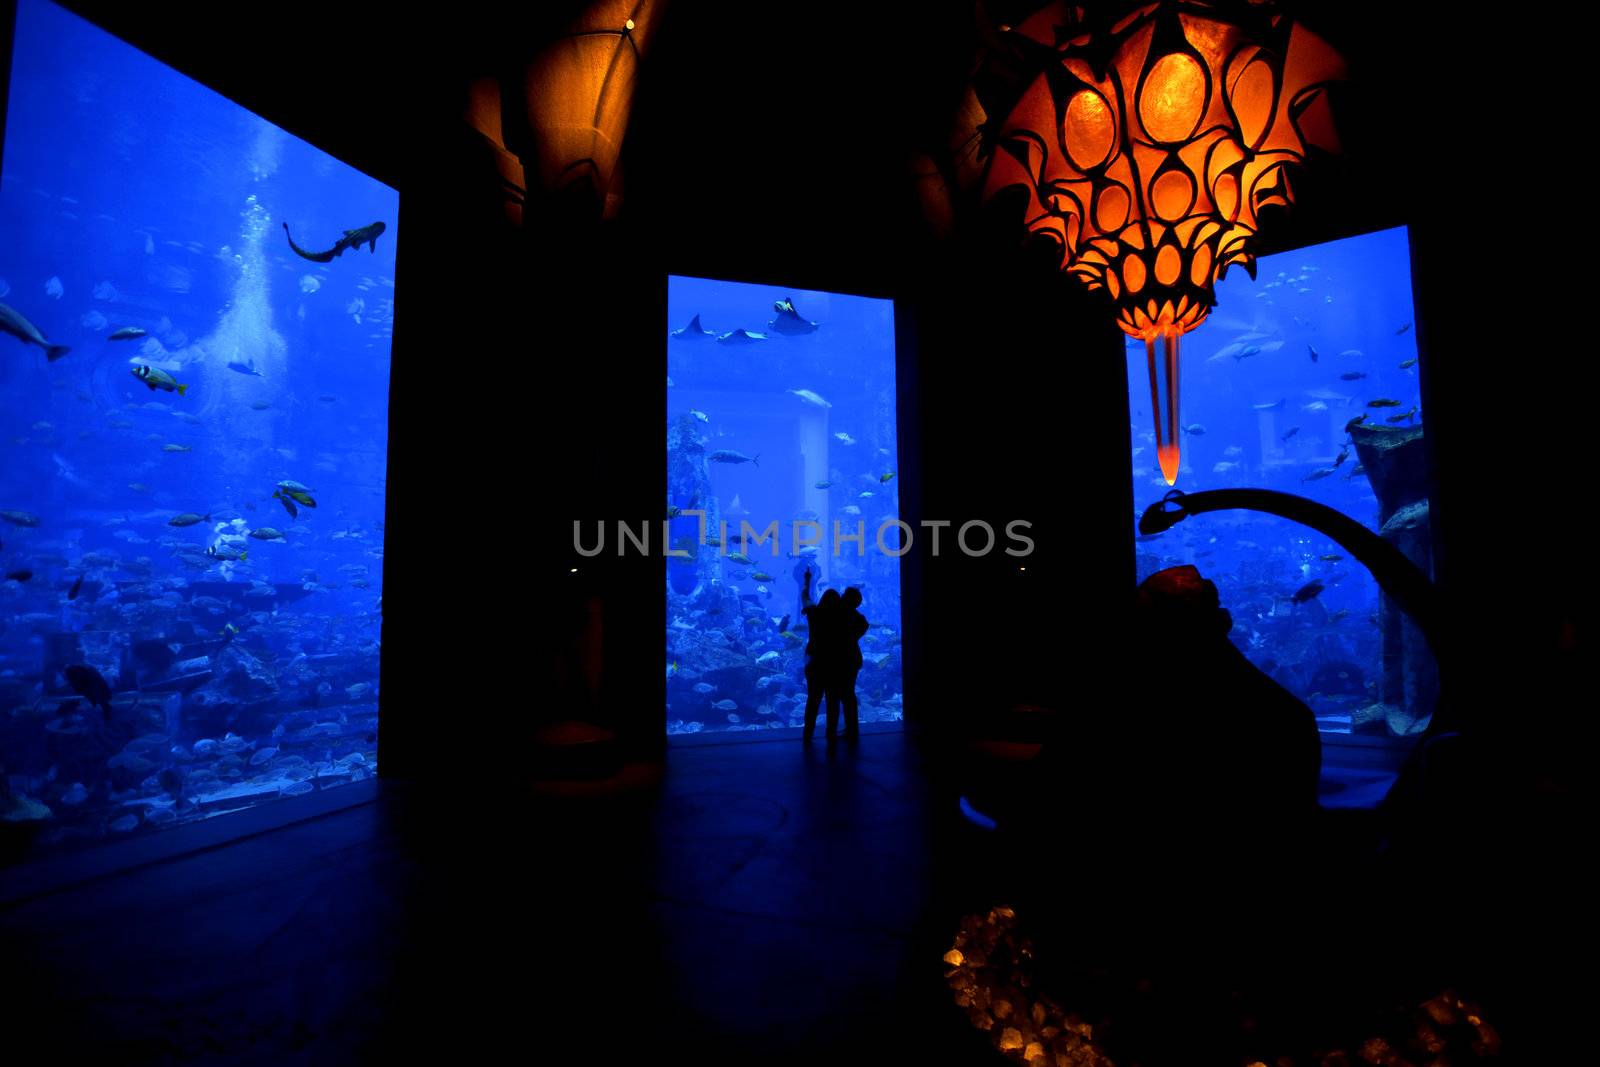 Silhouettes of people watching the life in an aquarium